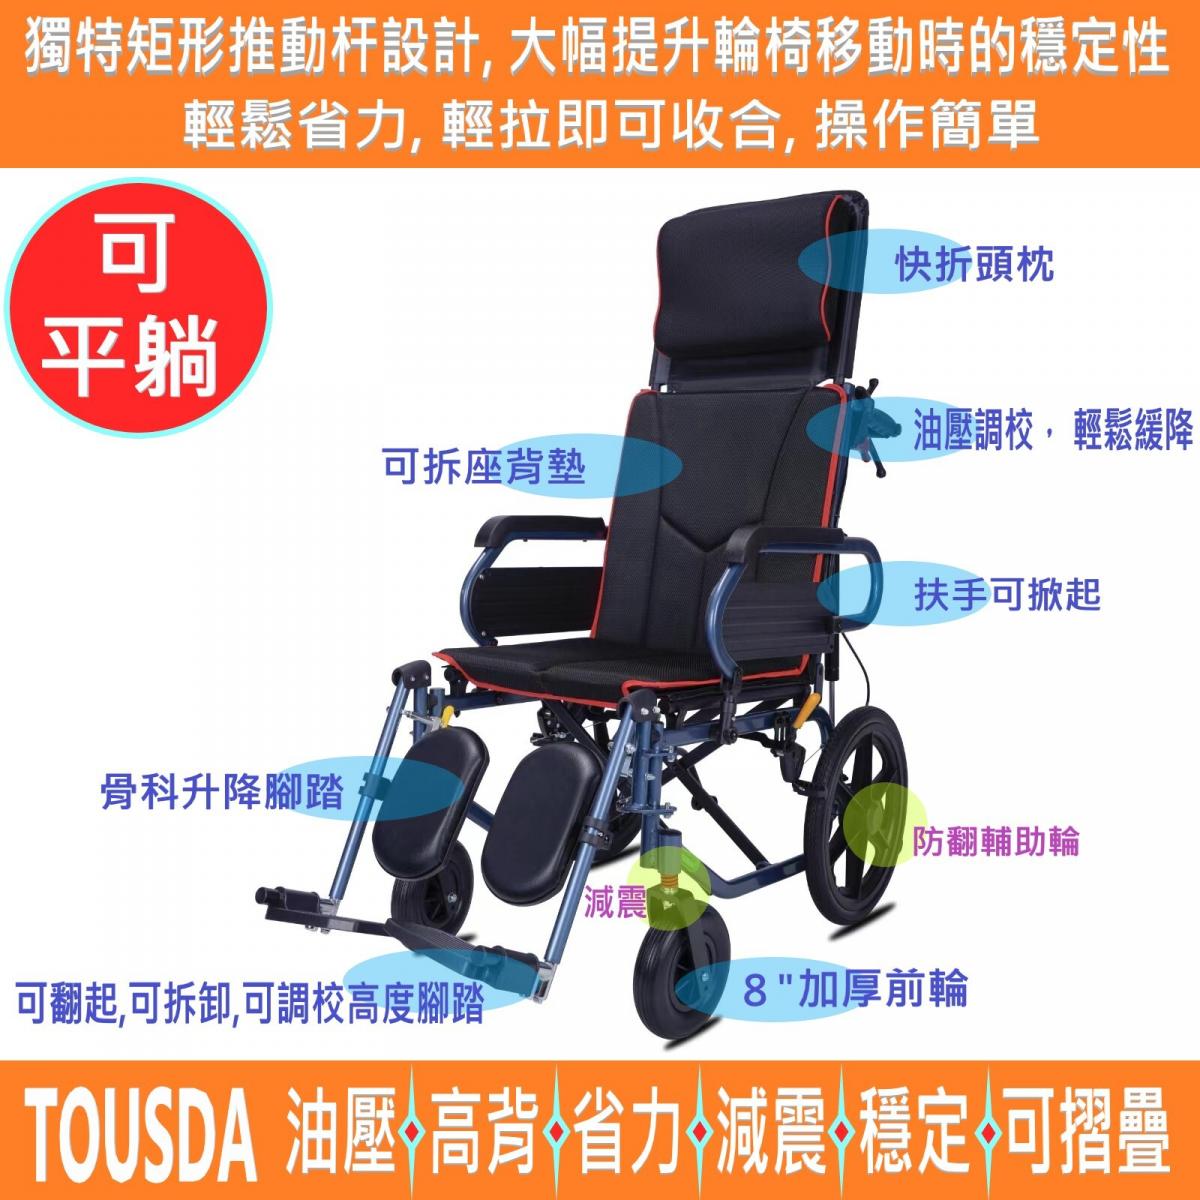 FHLT01BGCJ-16 - HYDRAULIC RECLINING WHEELCHAIR (up to 170 degree from seat surface)